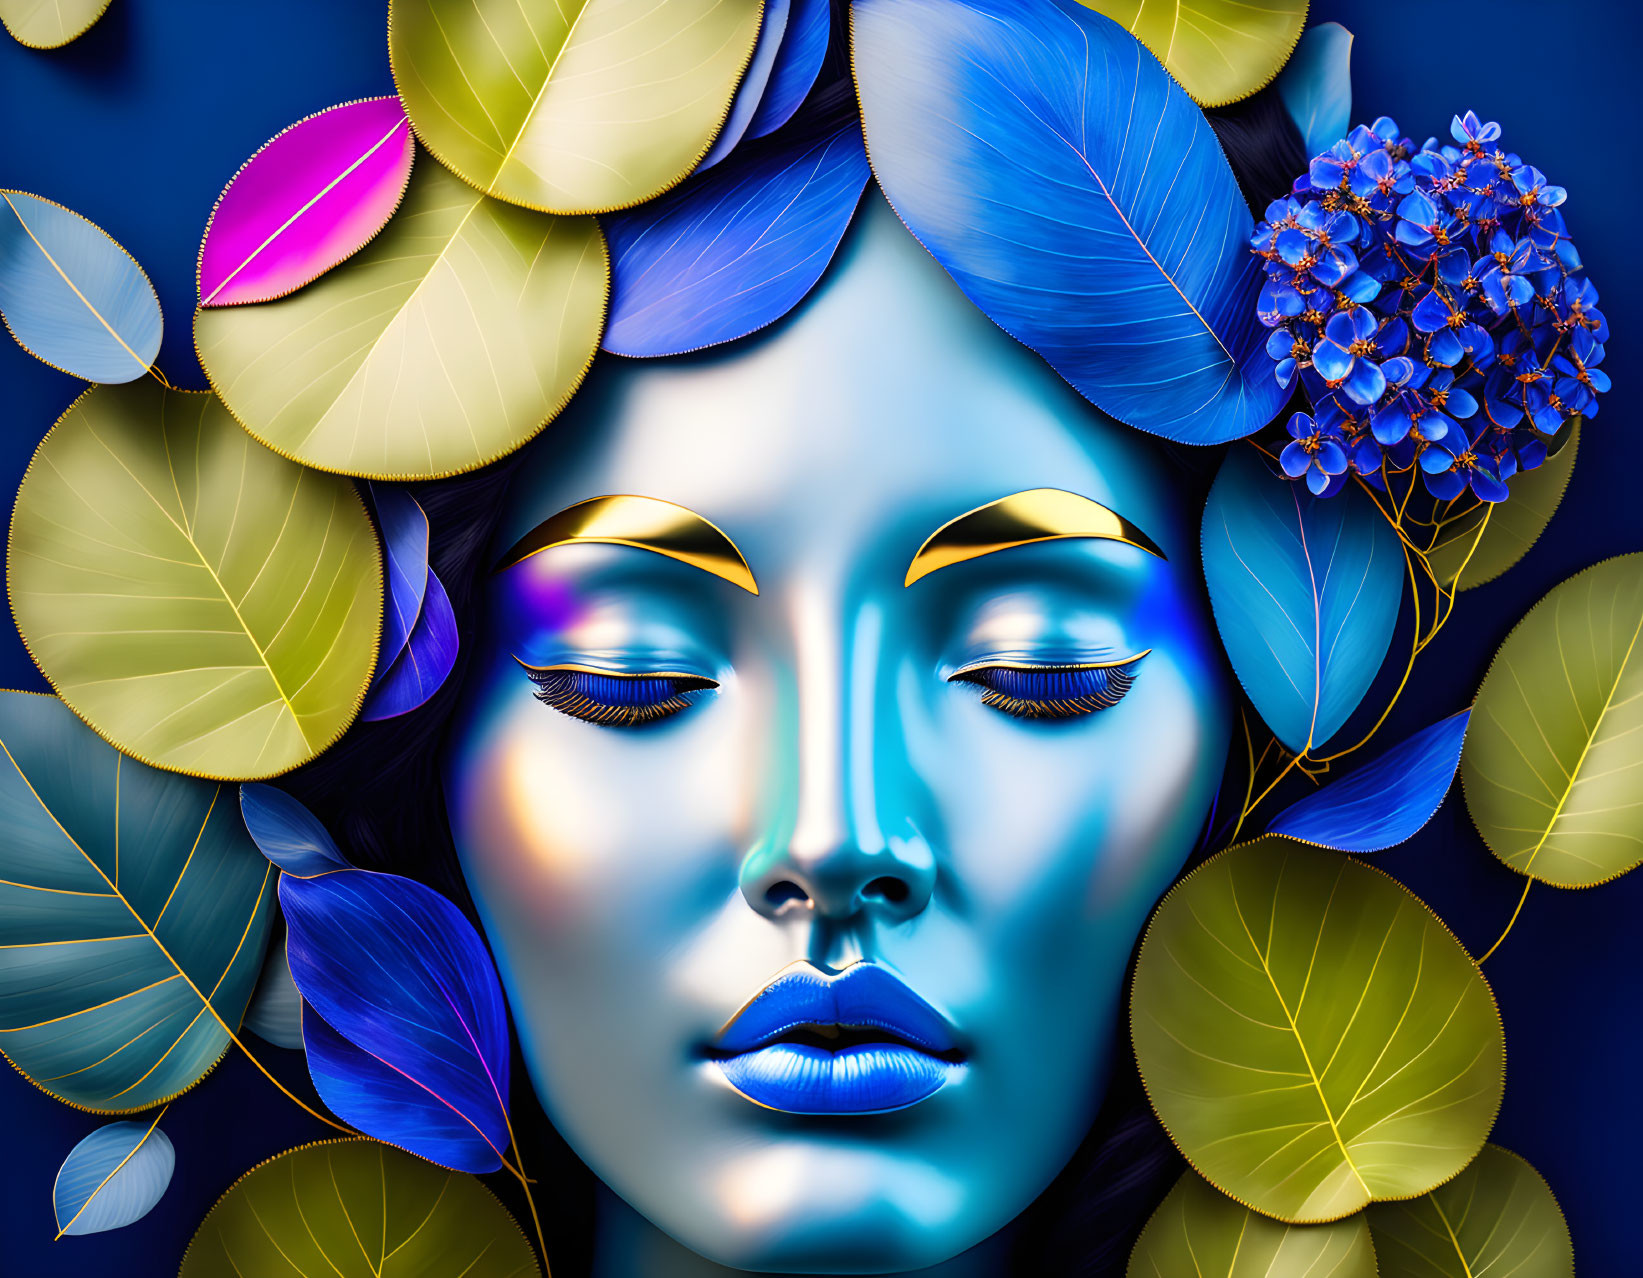 Stylized portrait with vibrant blue skin, green leaves, blue flowers, bold makeup, closed eyes